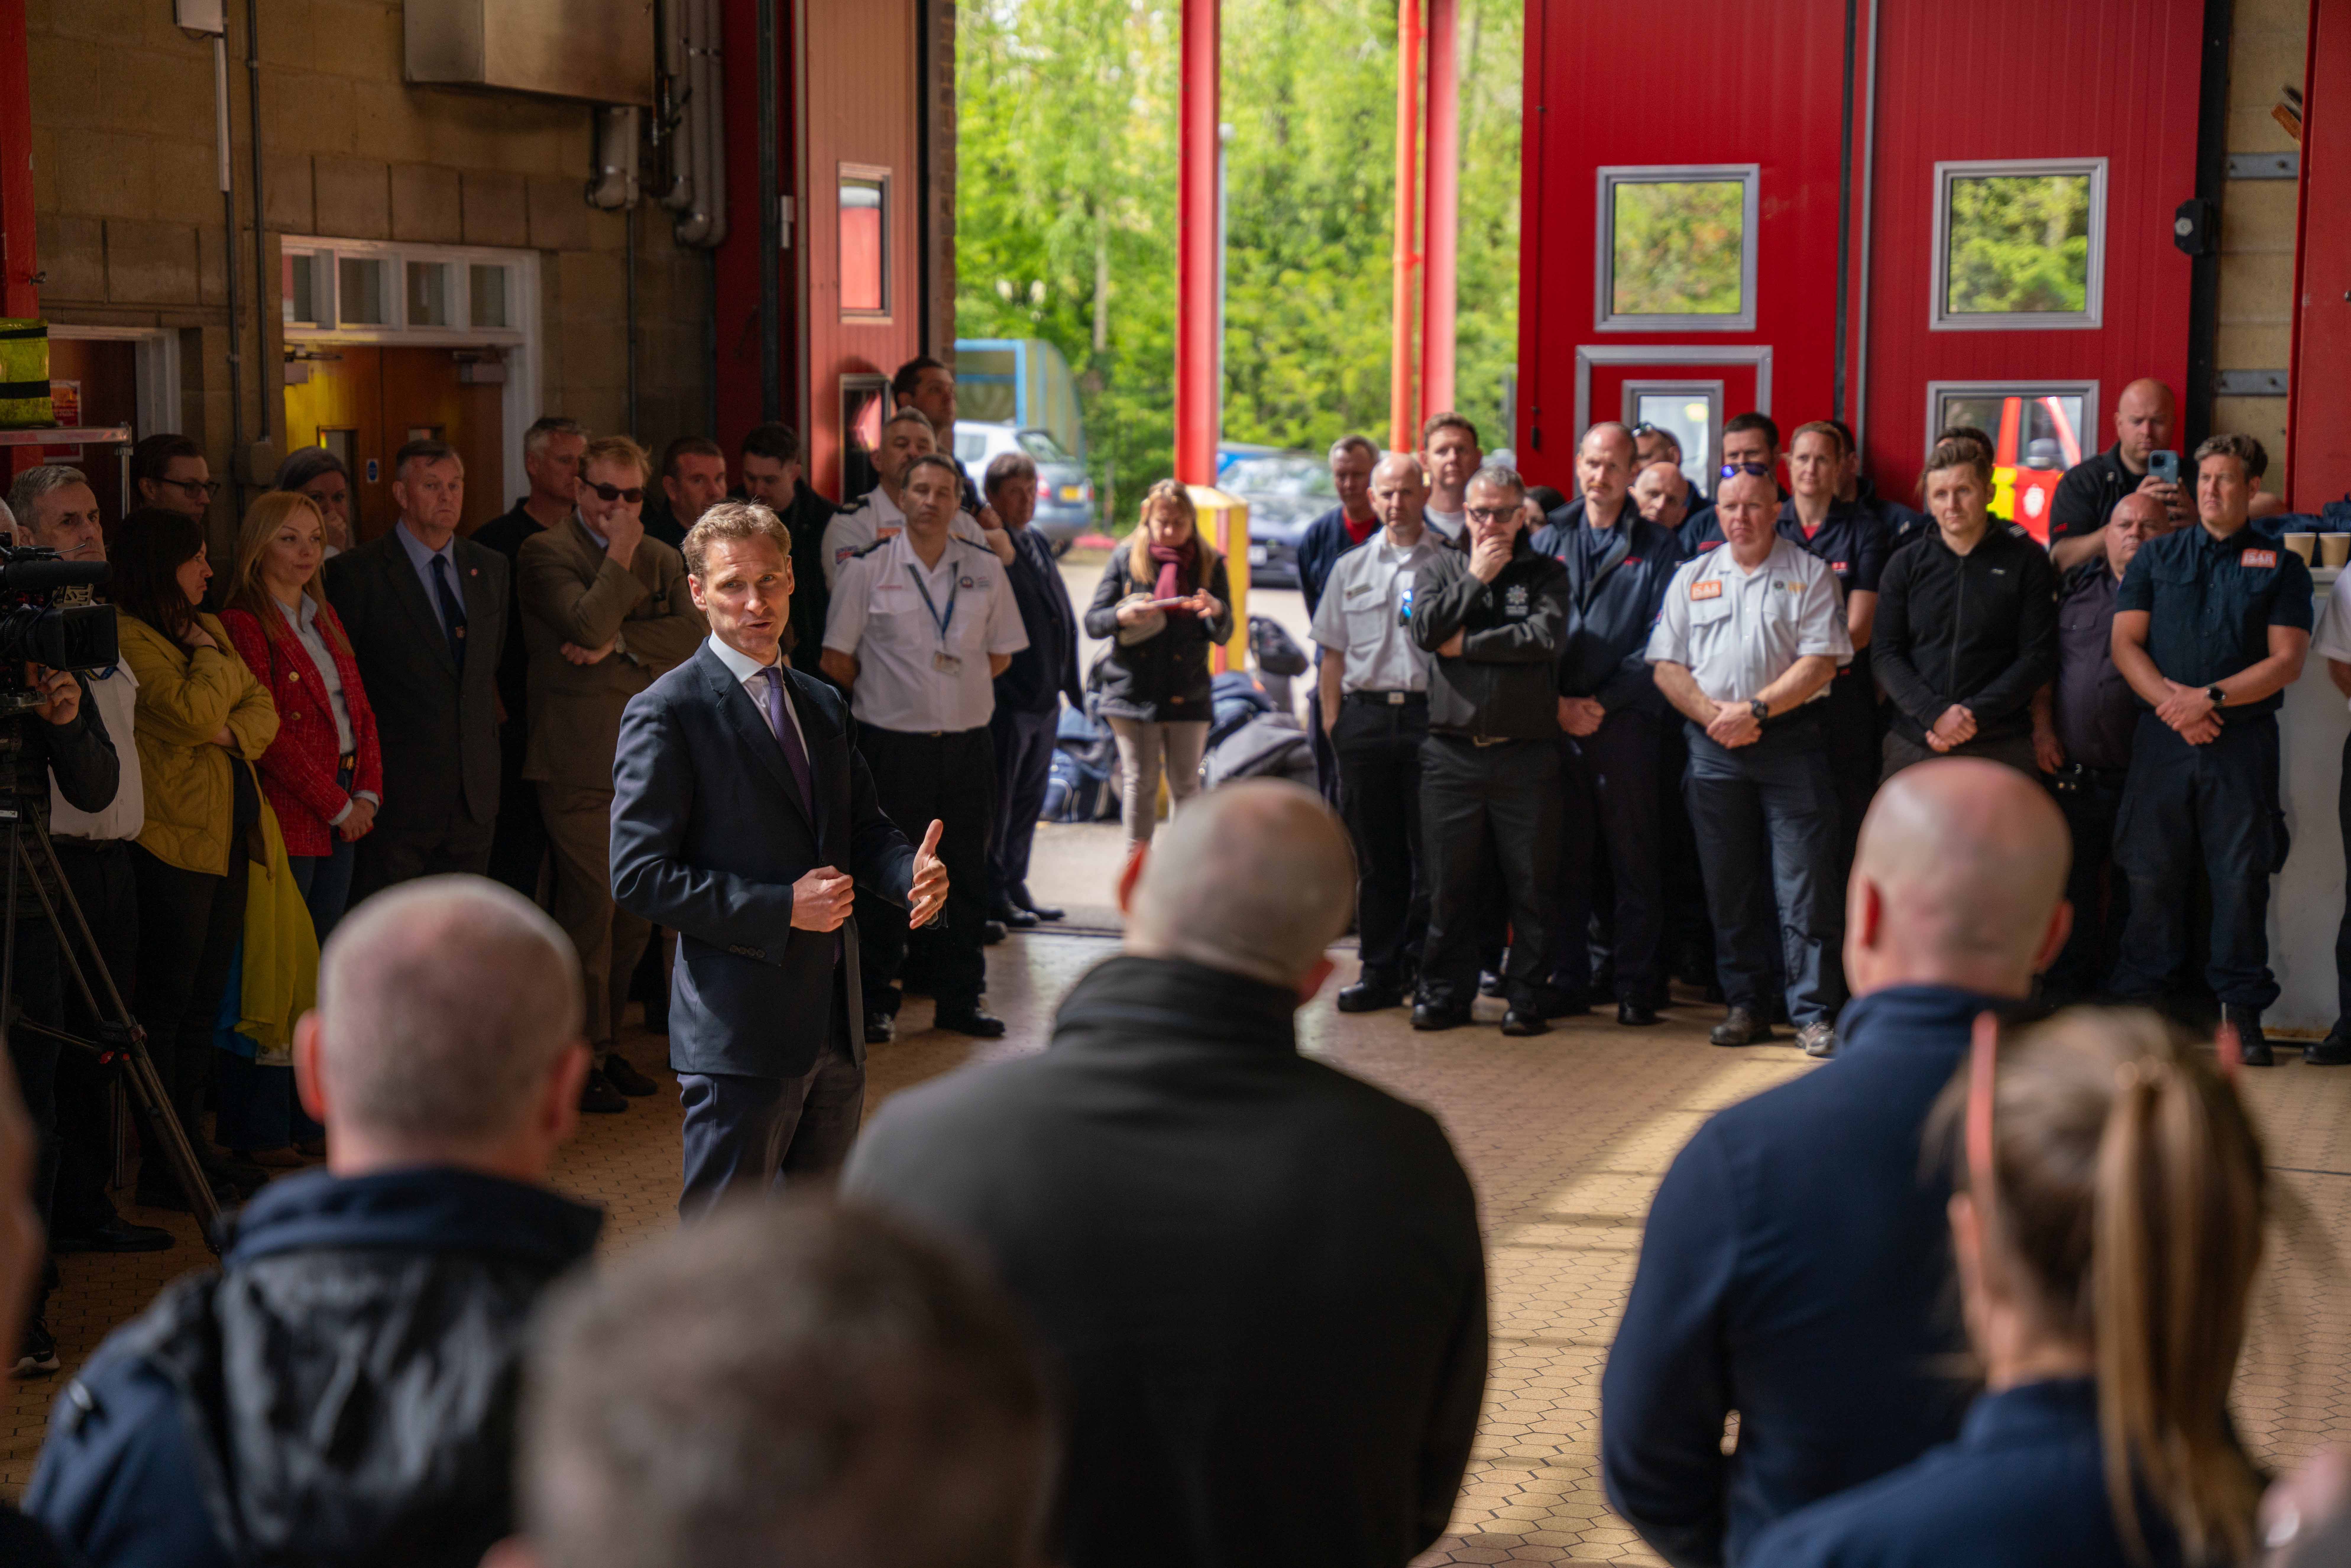 Minister Philp addressing volunteers UK fire and rescue services, FIRE AID and the Fire Industry Association.